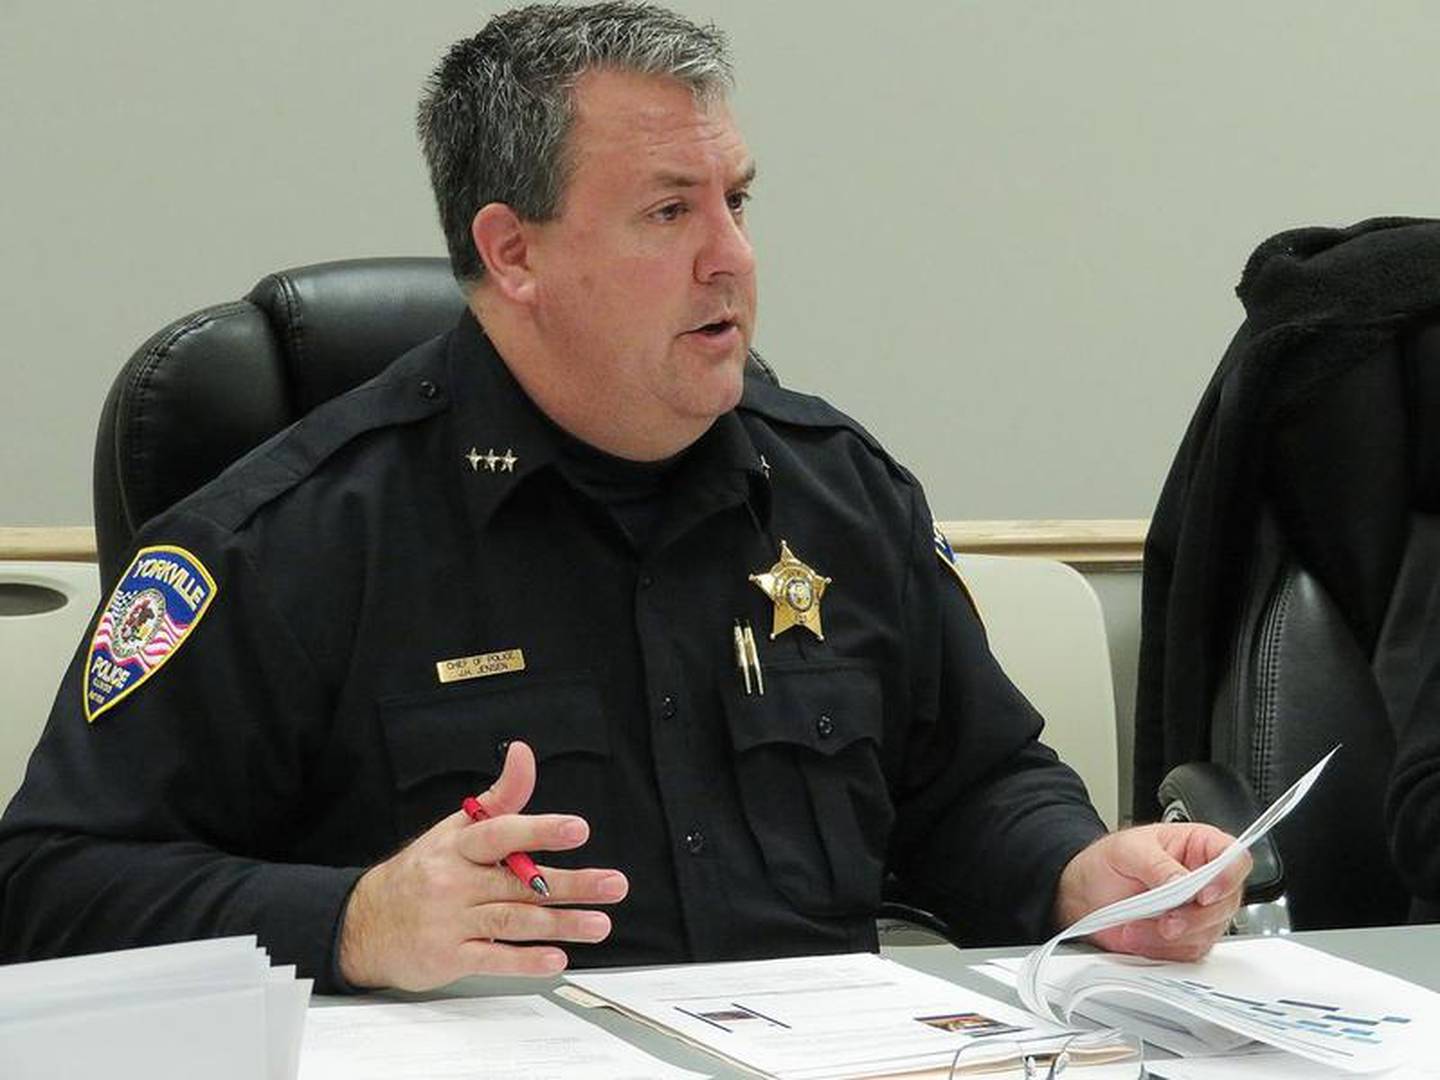 Yorkville Police Chief Jim Jensen talks during the city's public safety committee meeting on Thursday, Jan. 2 at City Hall in Yorkville.